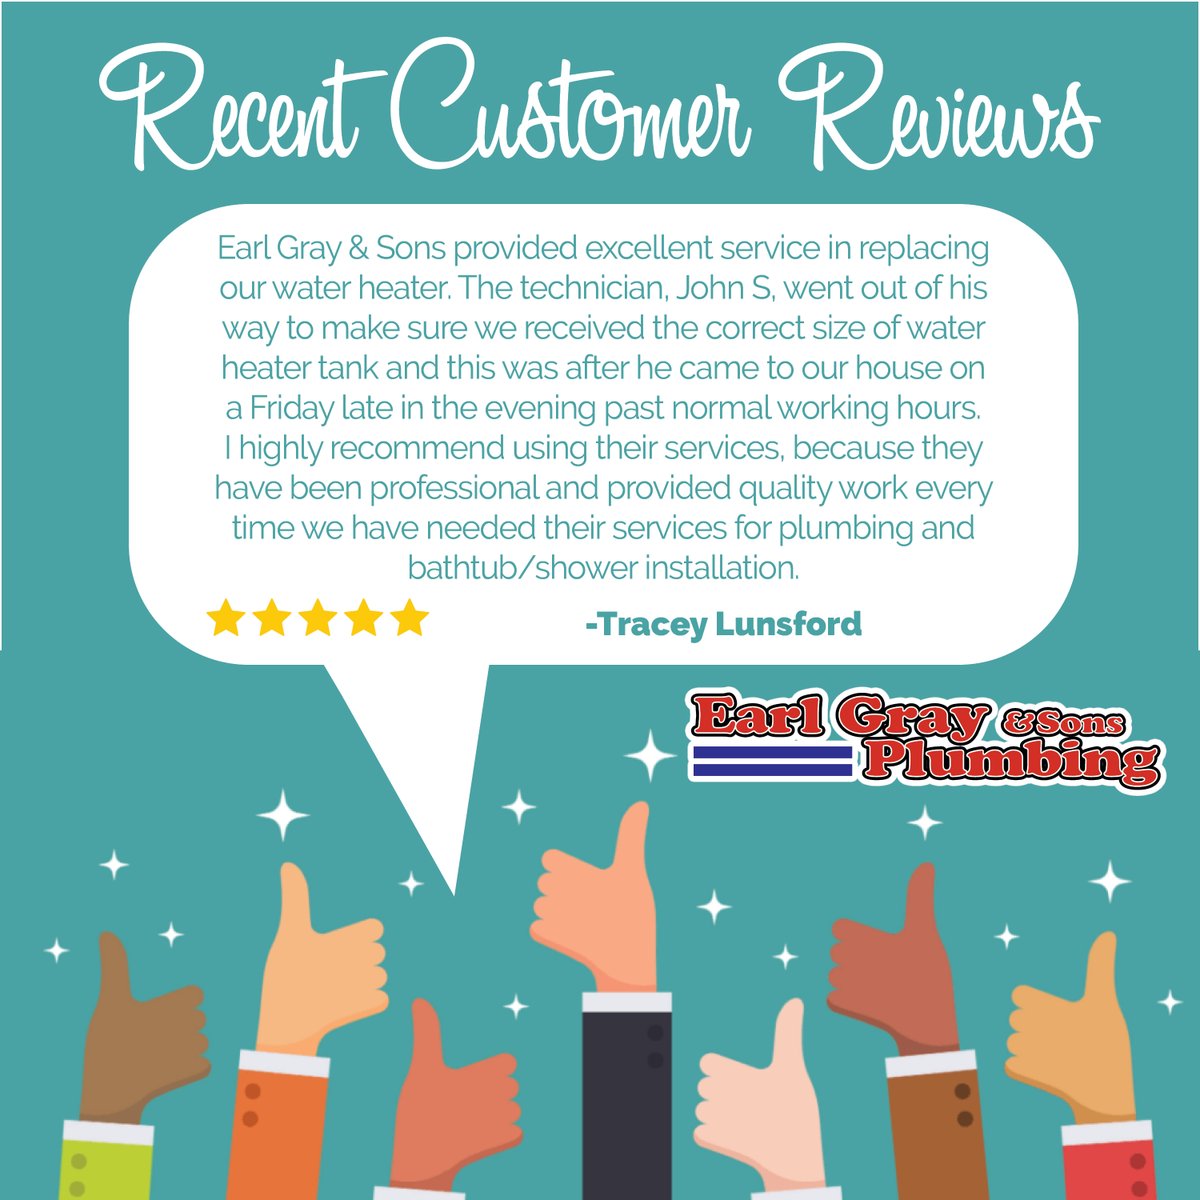 Another wonderful review from a thoughtful customer. Thank you Tracey! We look forward to serving you in the future. #greatcustomers